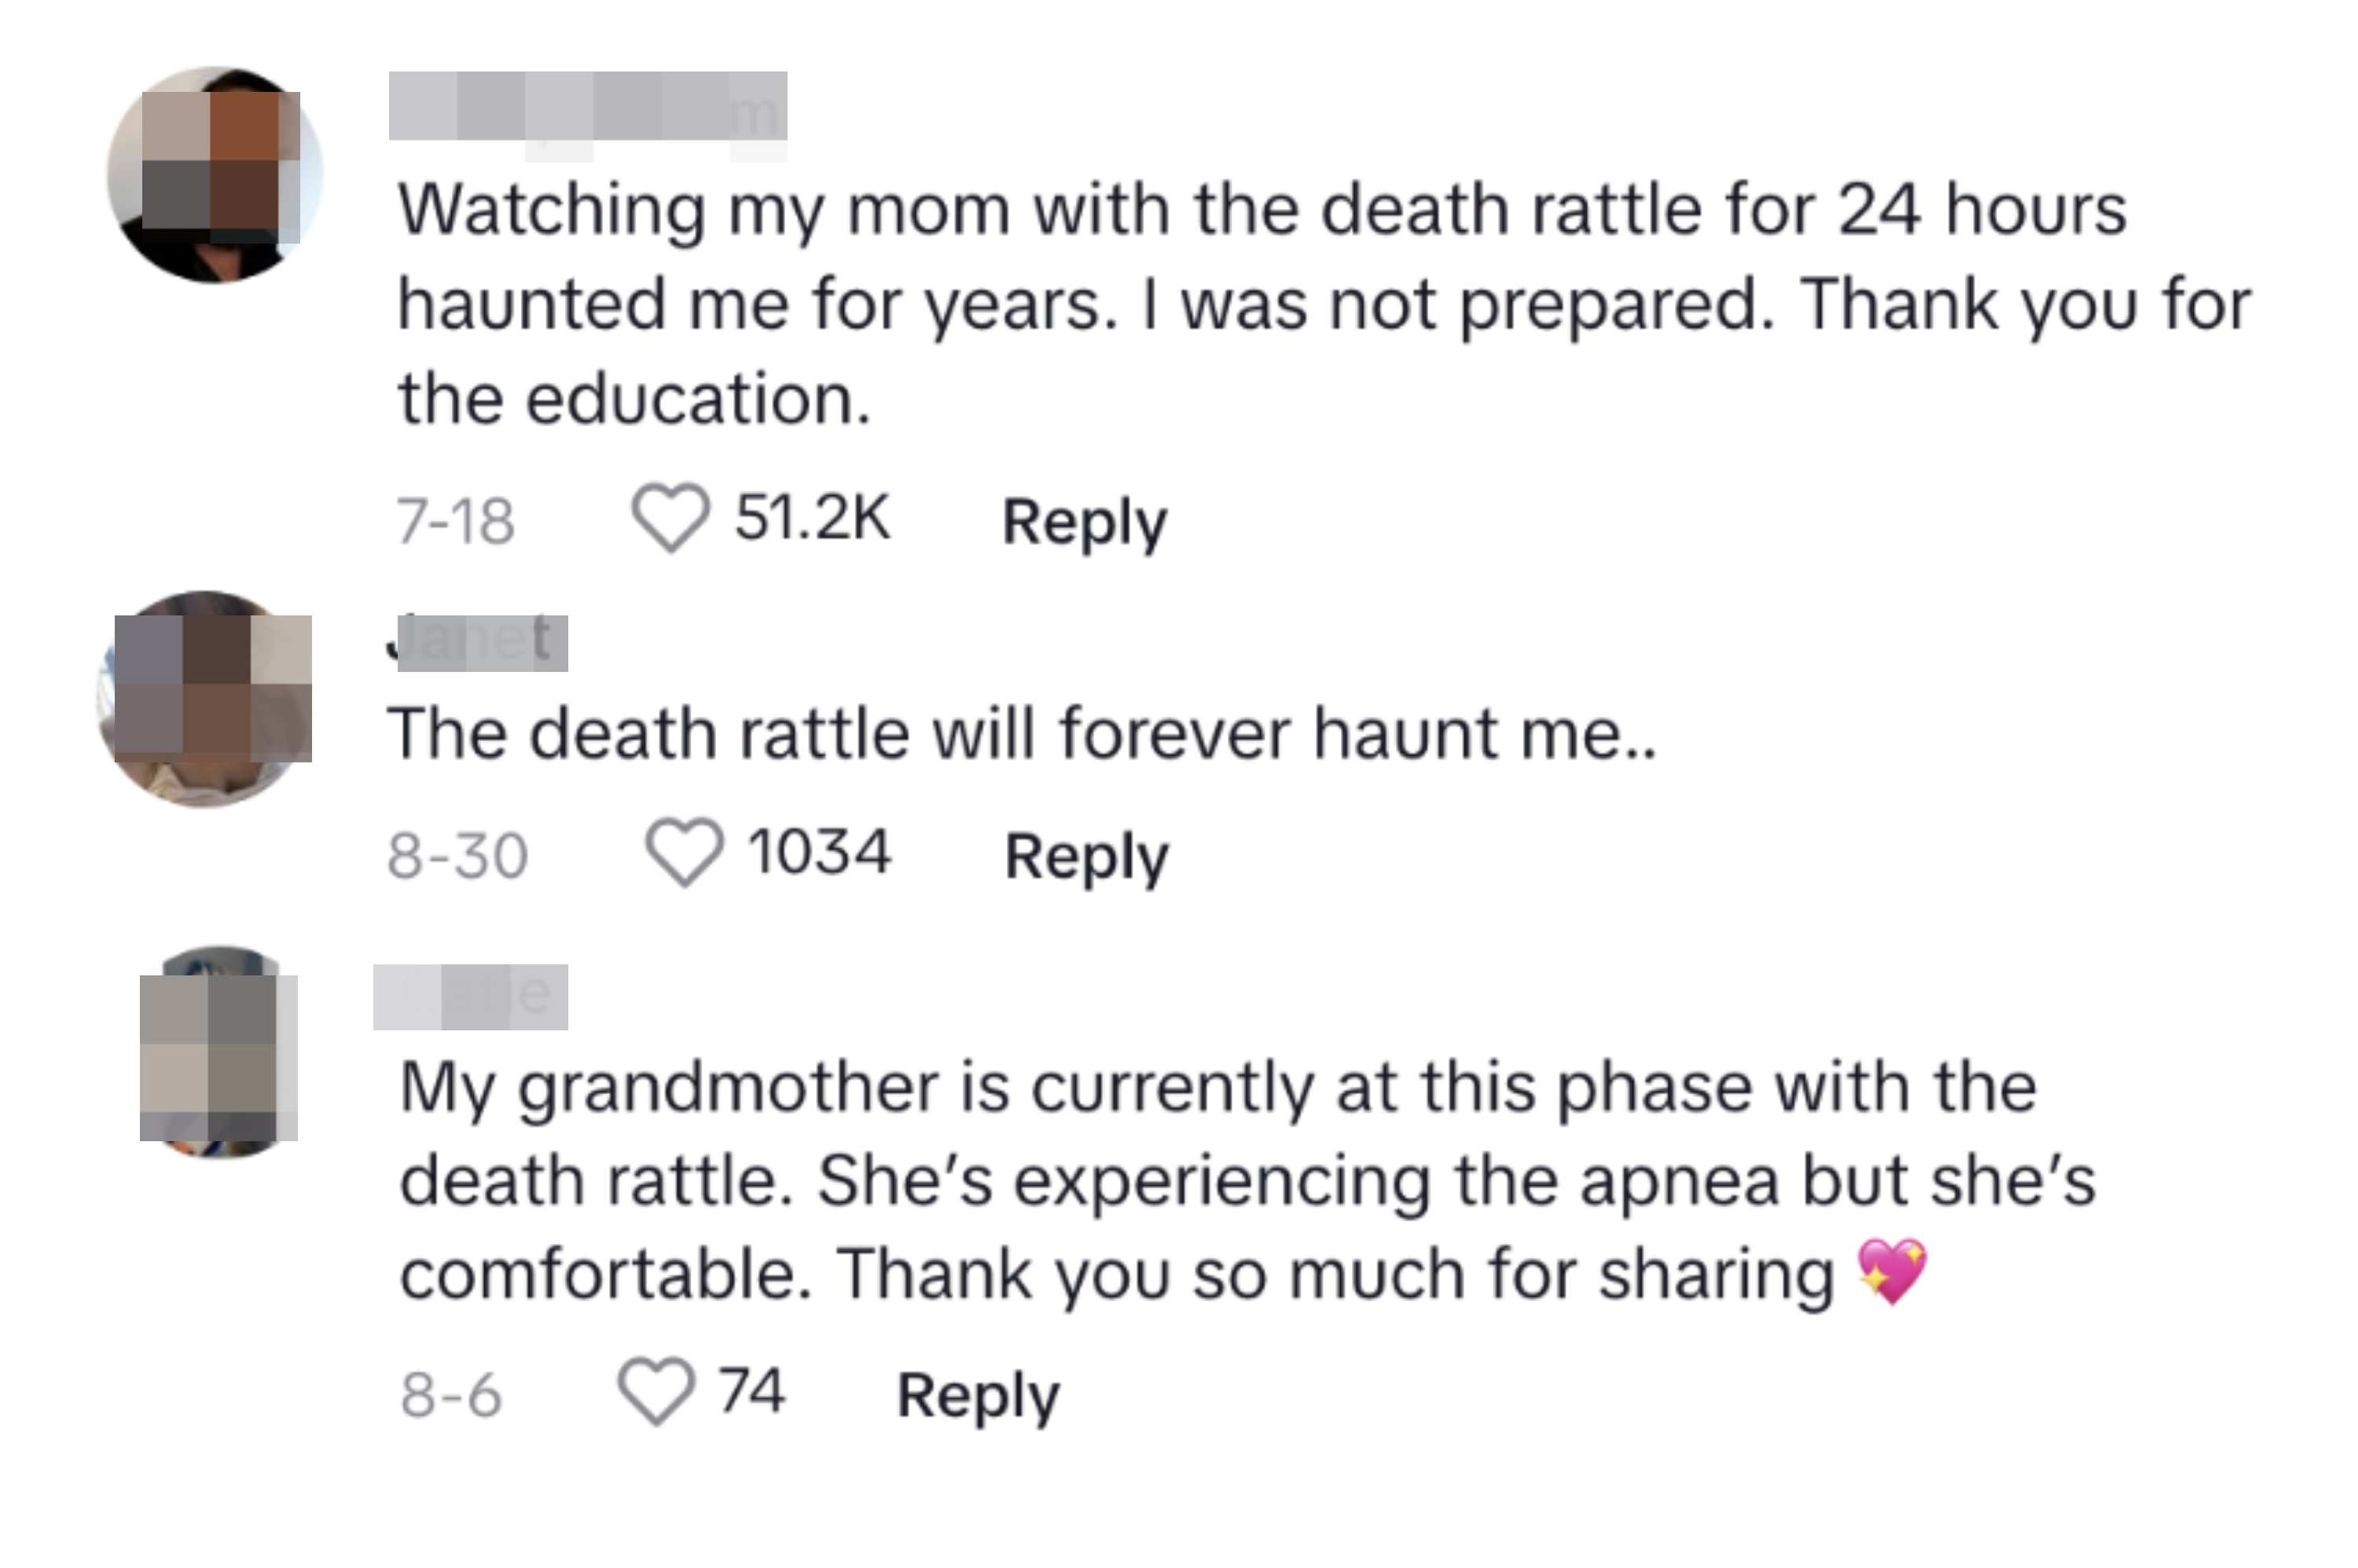 Commenters discuss witnessing the death rattle